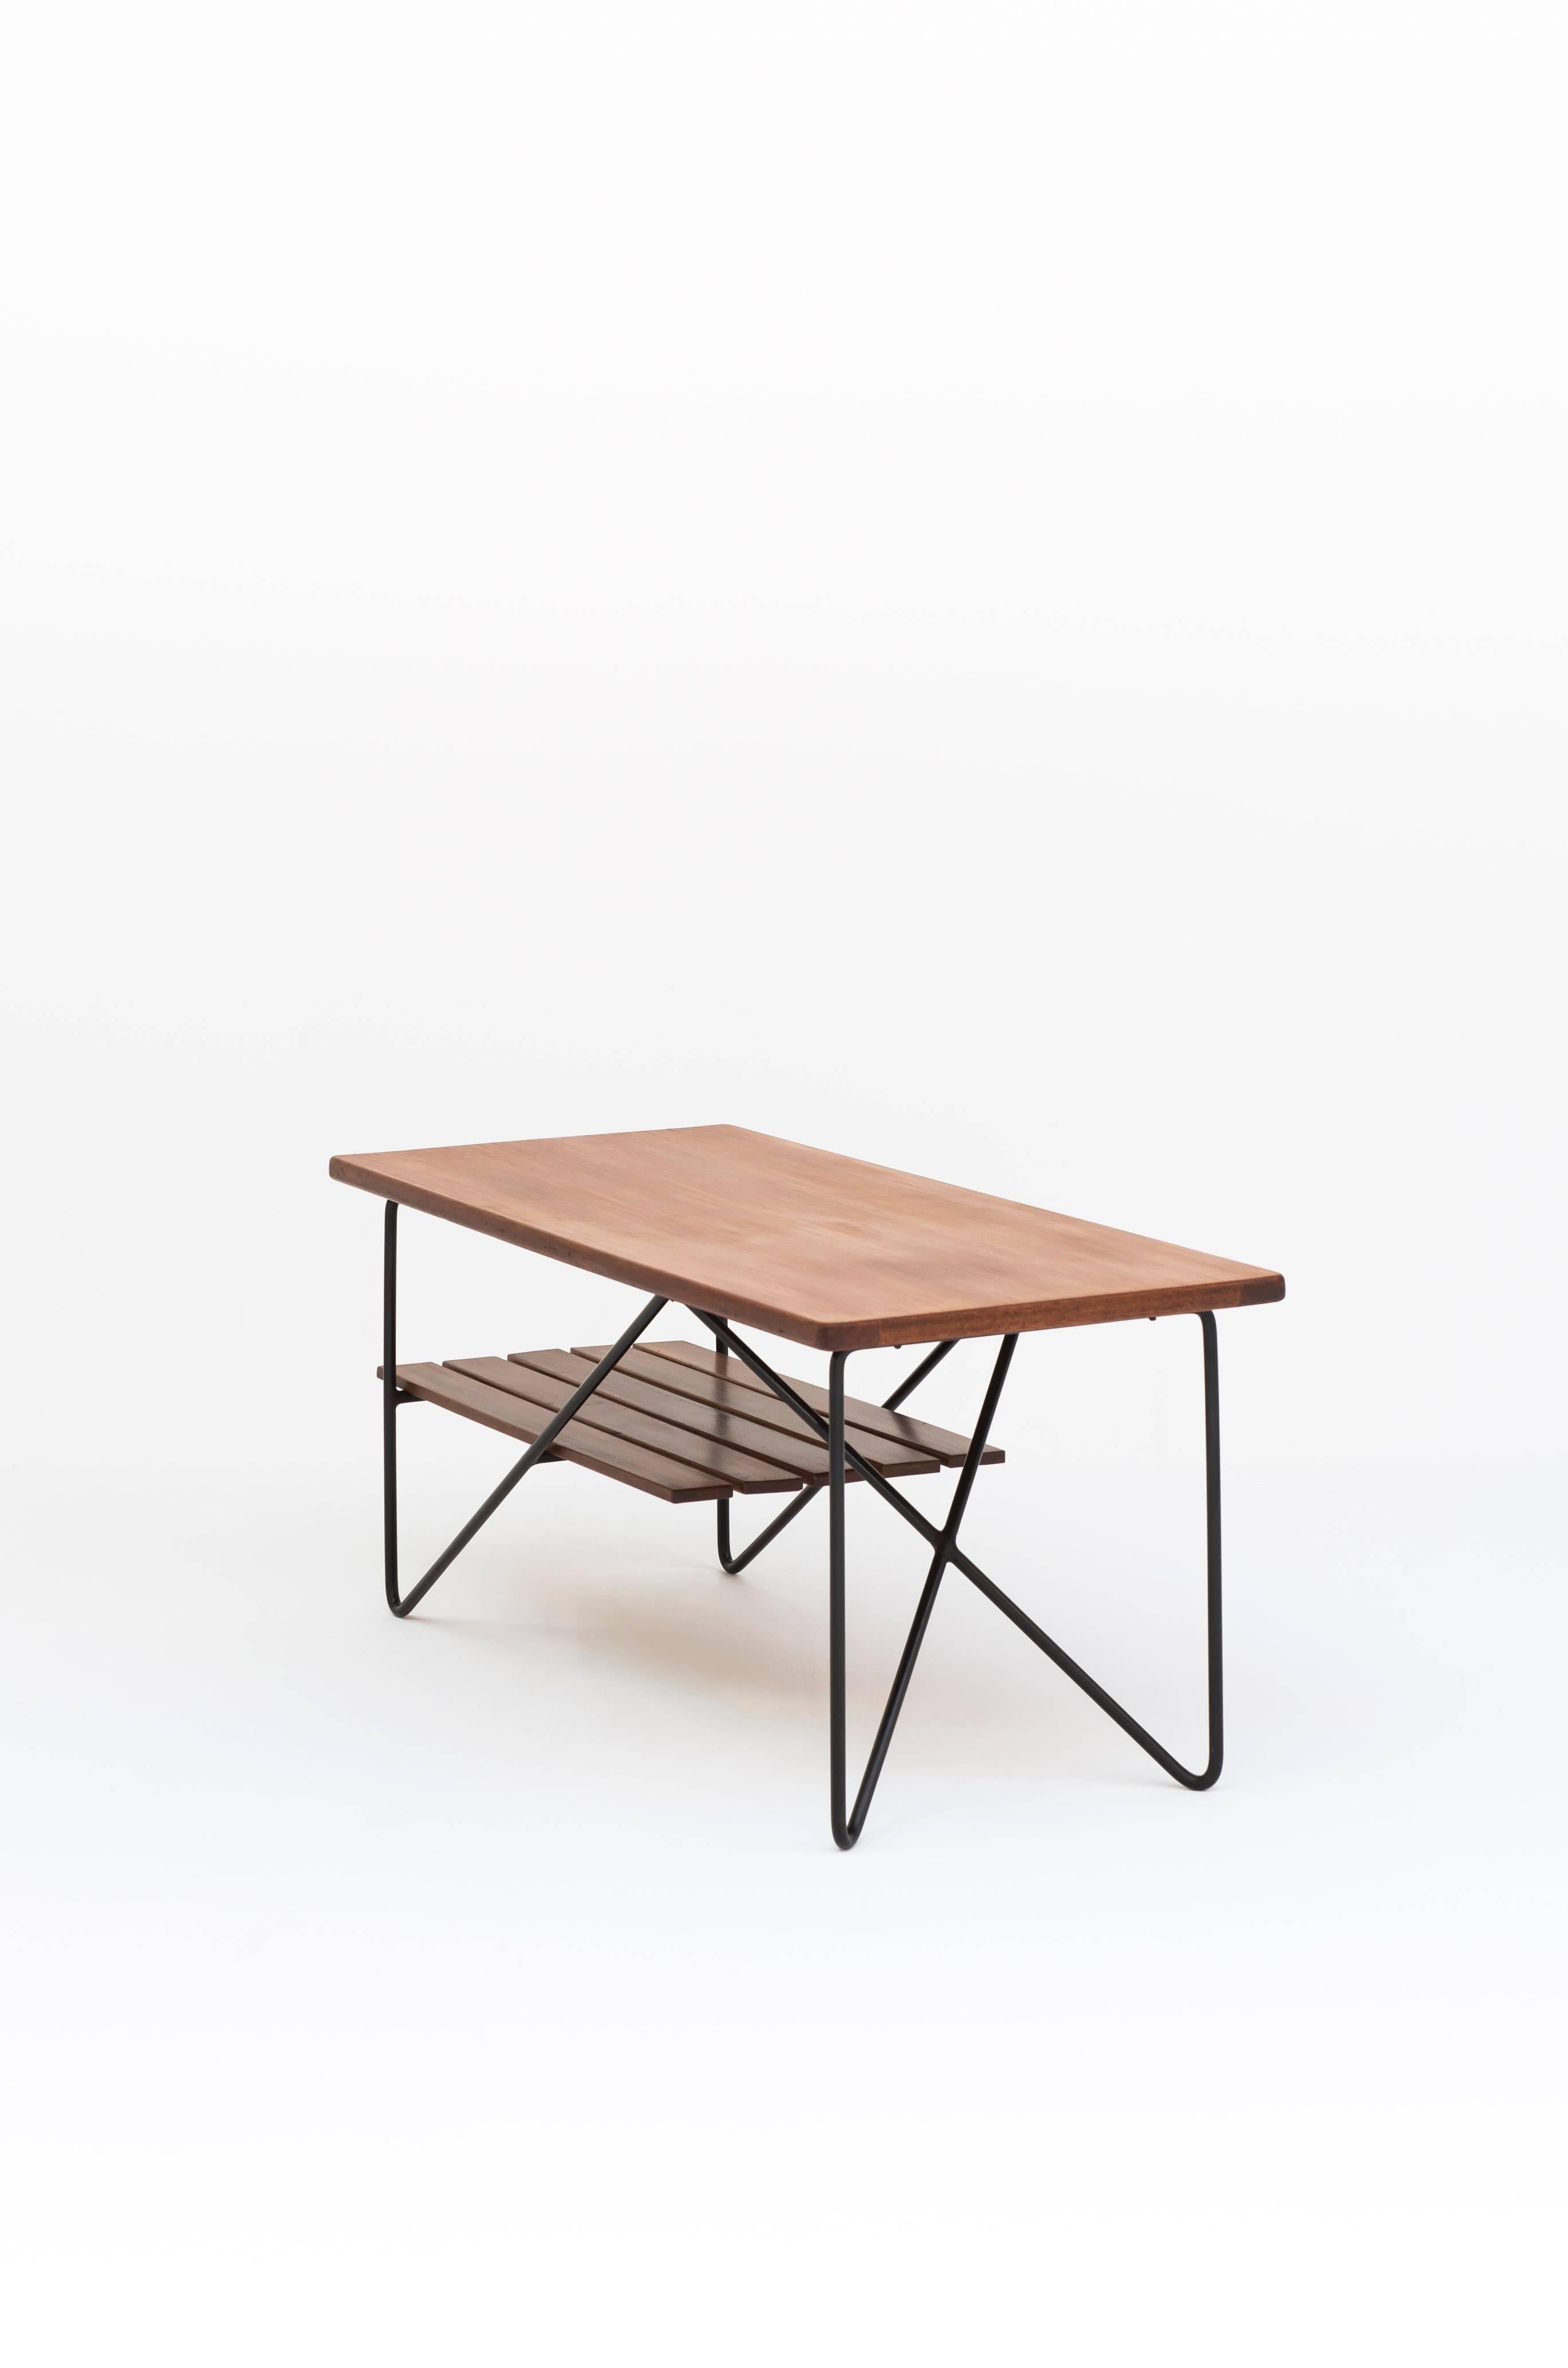 Lacquered Low Table GC52 by Rene-Jean Caillette, Charron Groupe 4 Edition, 1954 For Sale